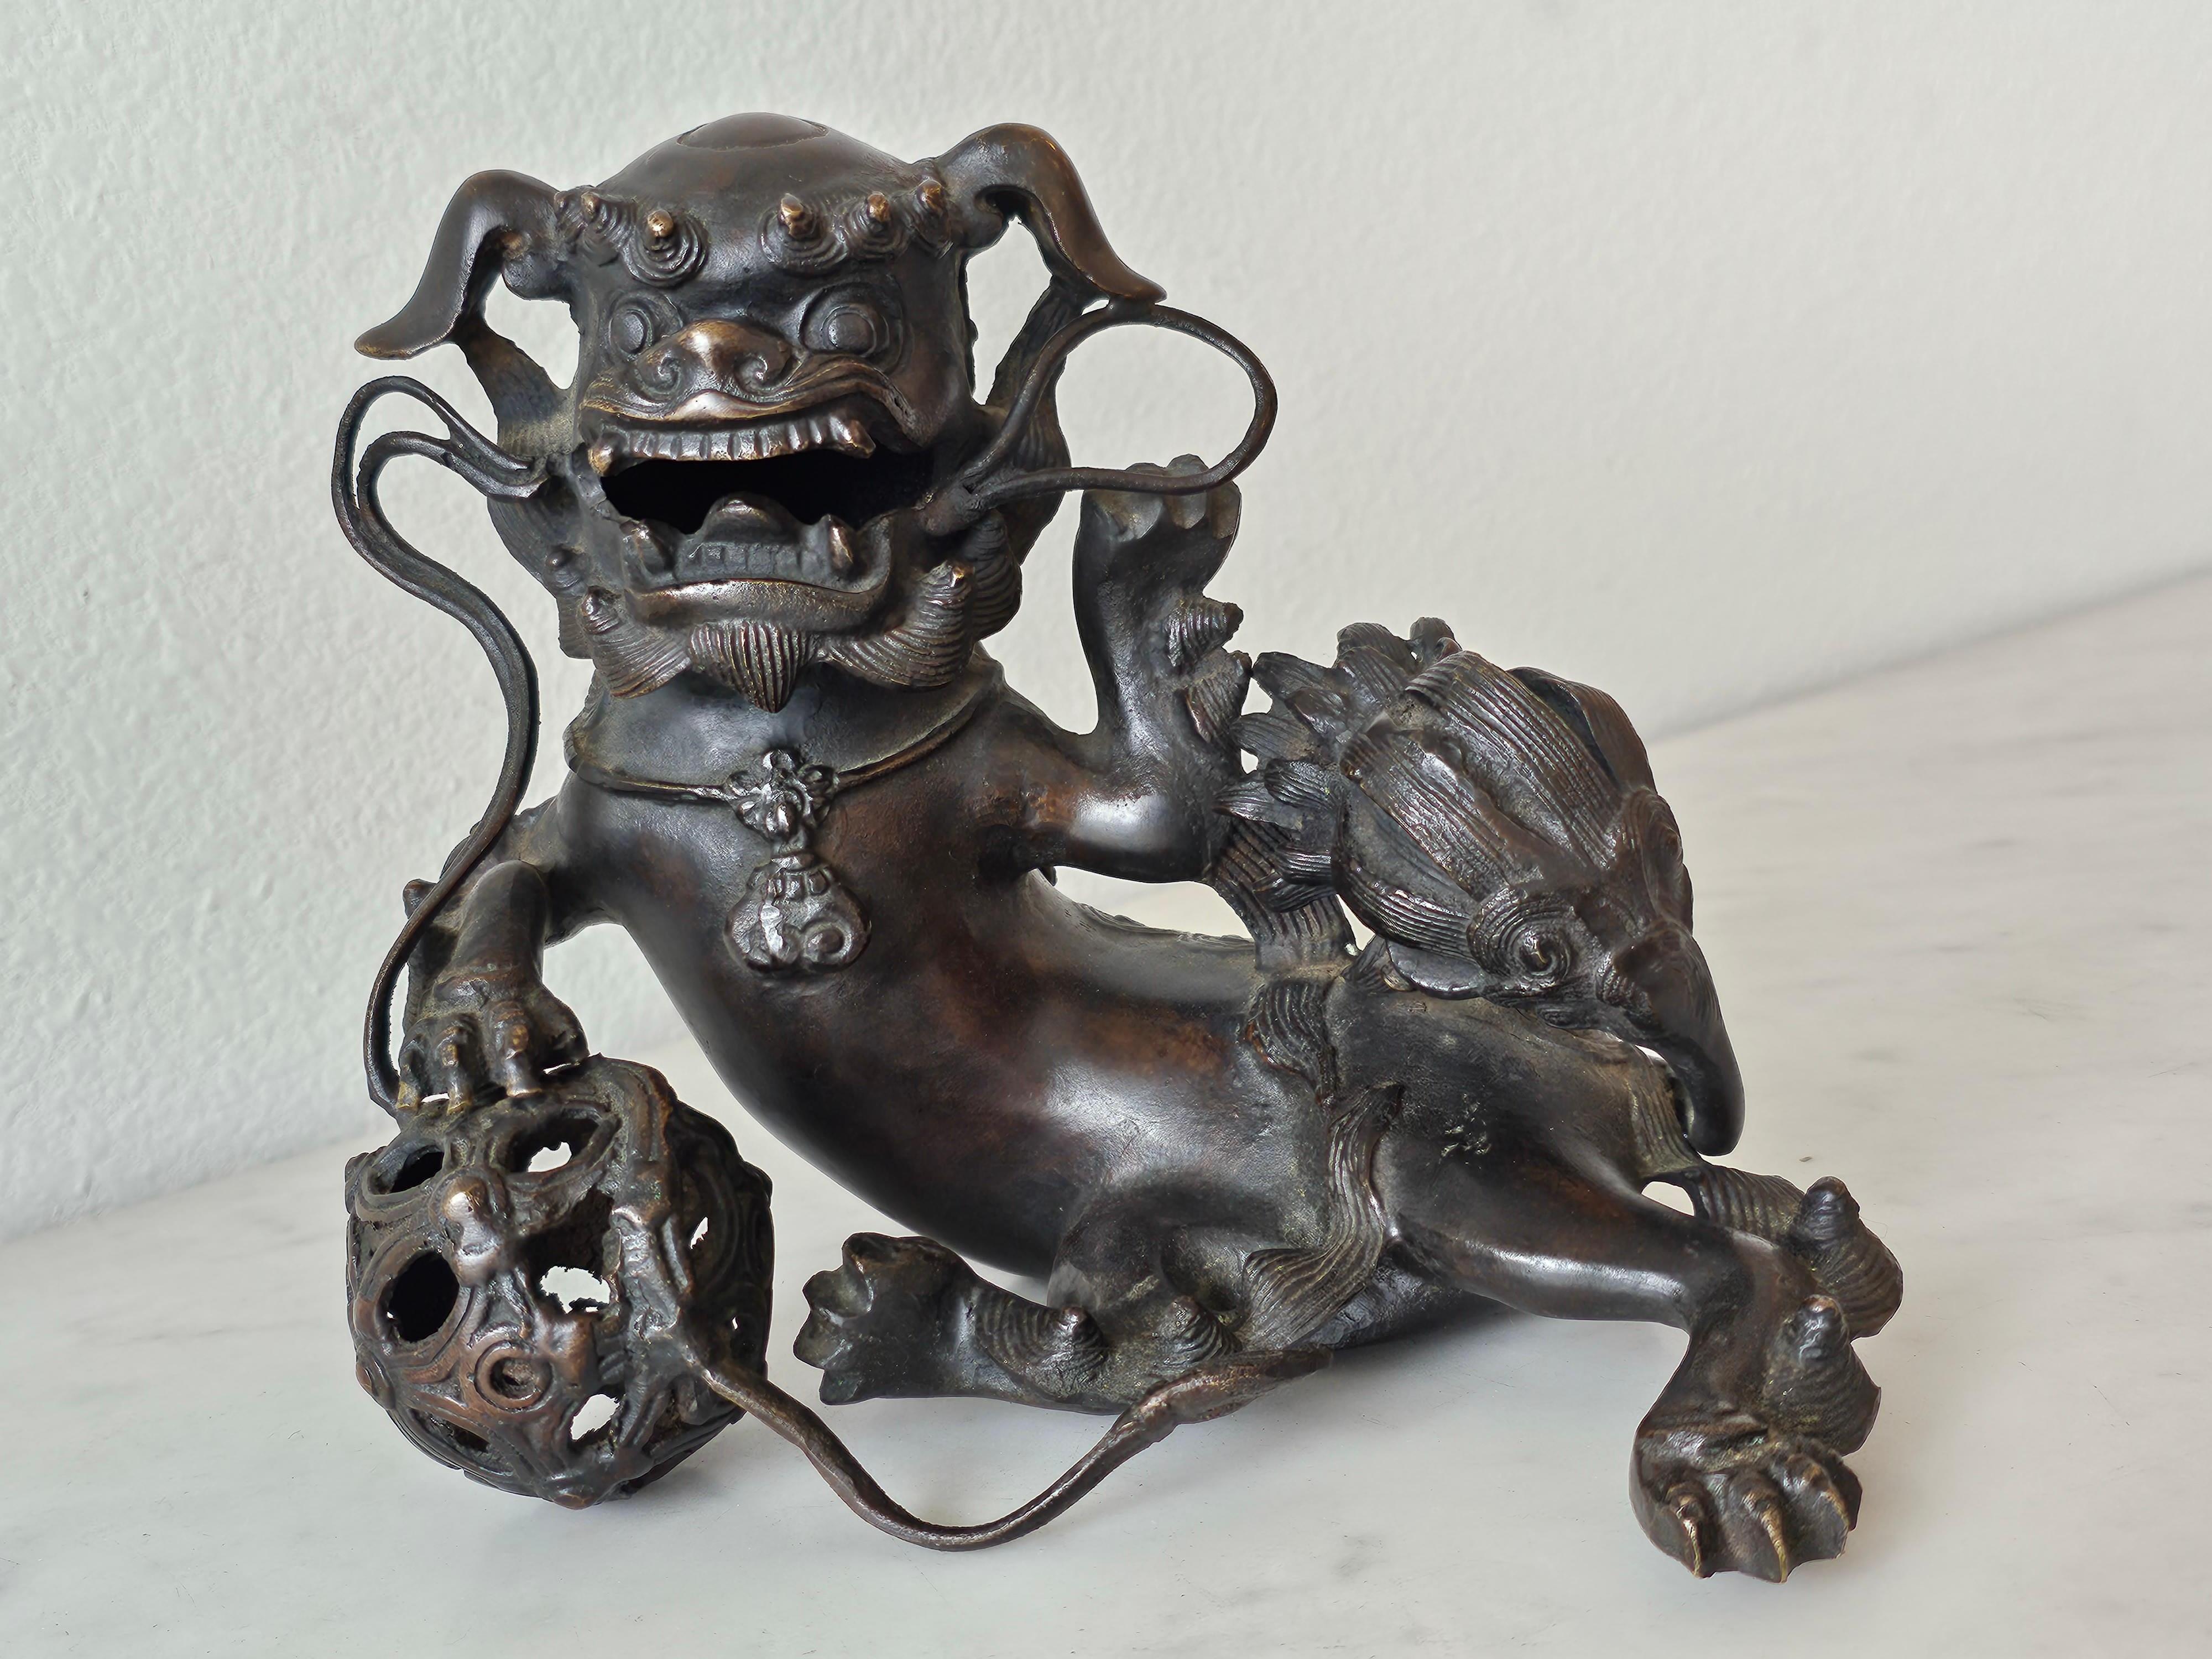 A remarkable Edo Period (1603-1868) Japanese patinated bronze Buddhistic lion censer, exceptionally executed sculptural shishi foo dog form, finely detailed, retaining the original removable cover back plate that allows burning incense to be placed